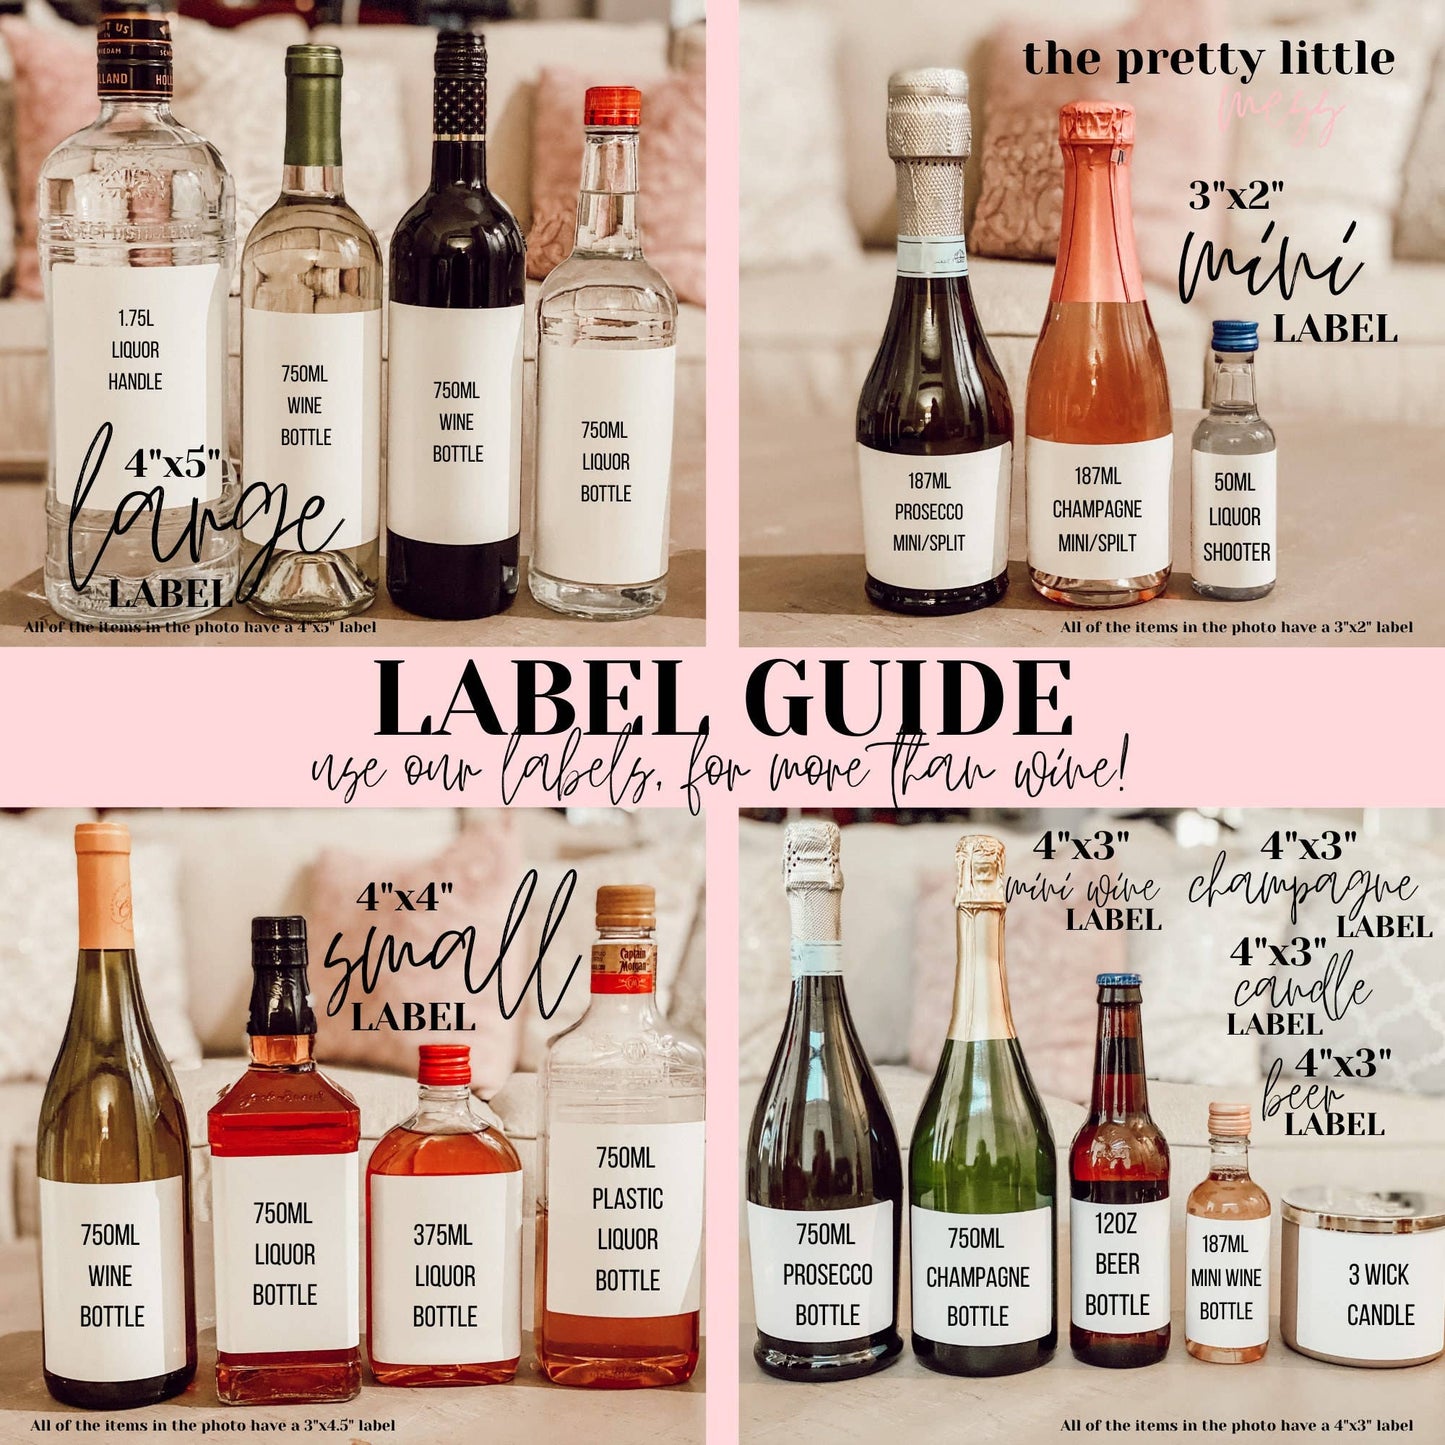 Bottle Labels: "You Can Stop Asking"